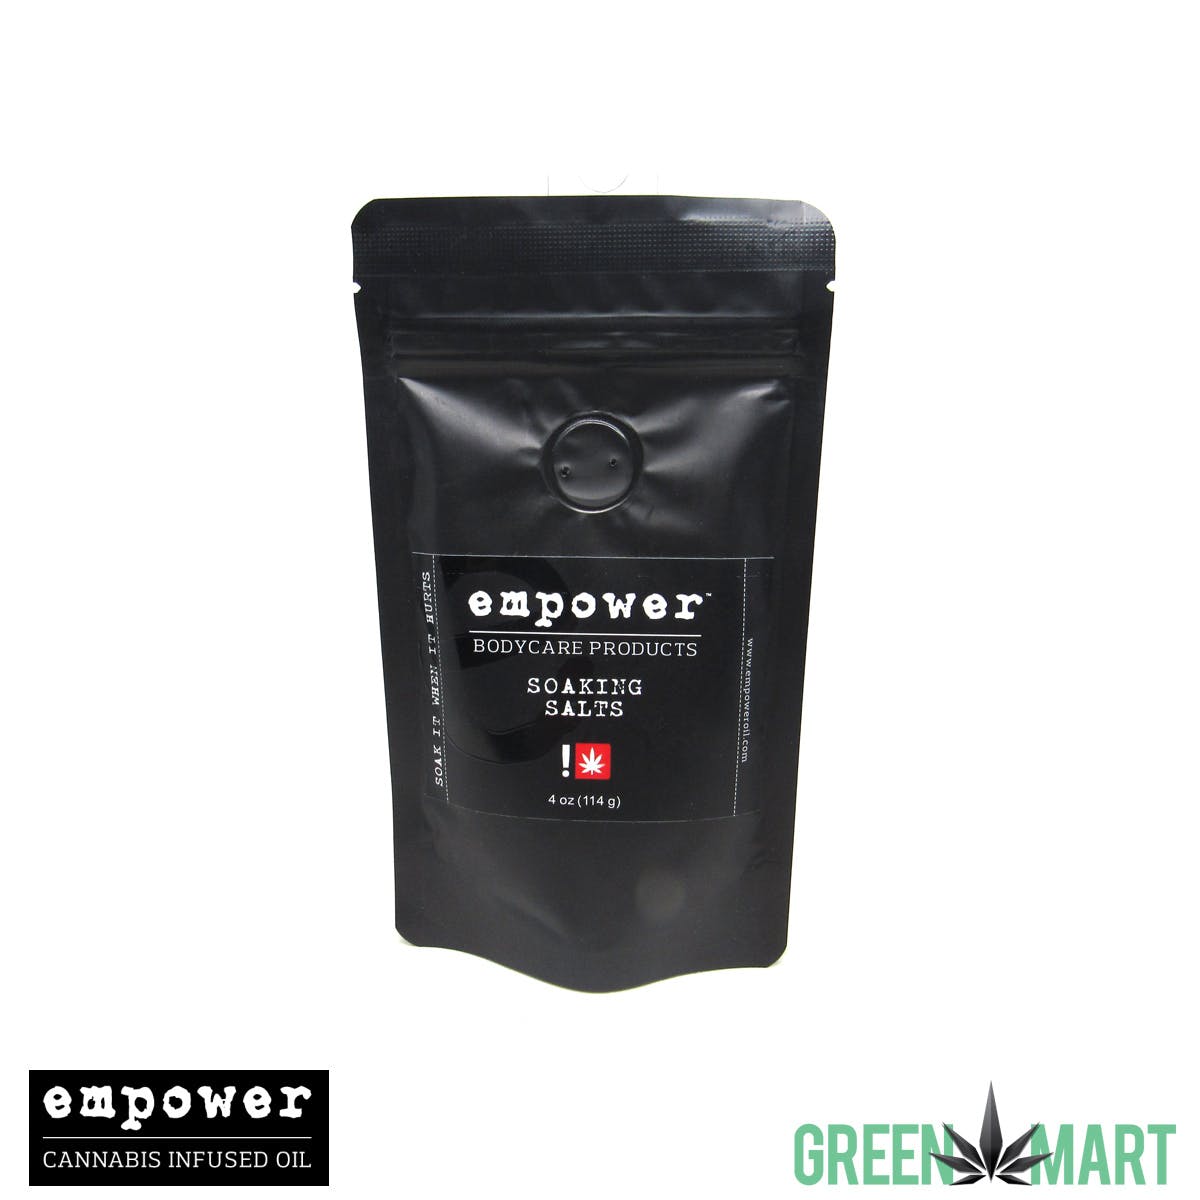 Empower Bodycare Products - Soaking Salts Small 4oz